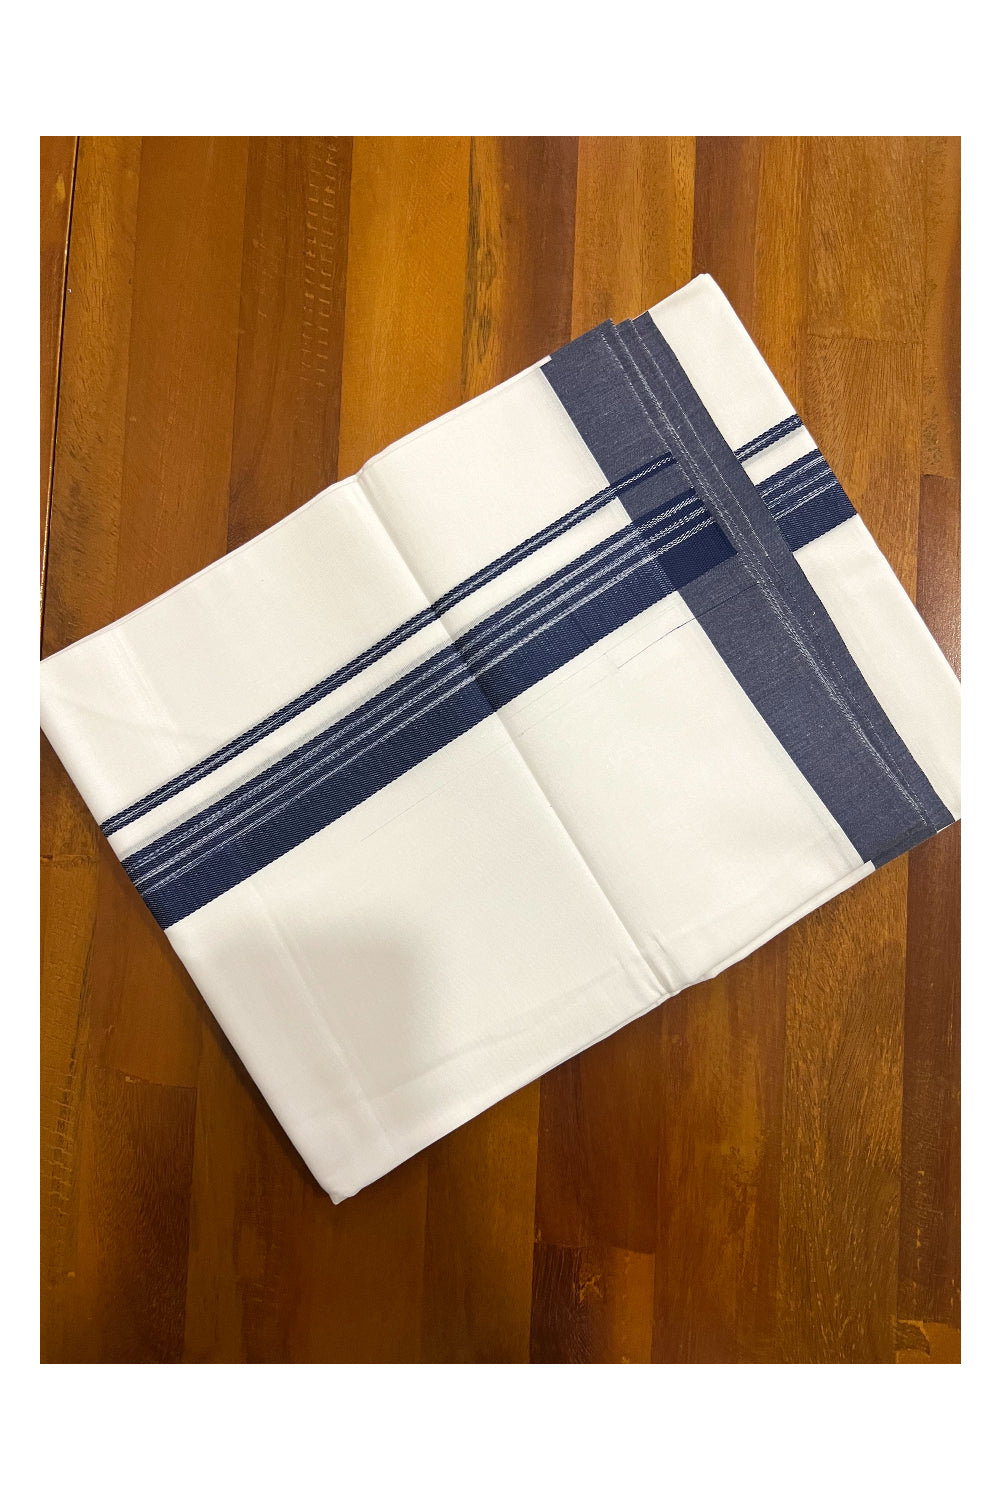 Pure White Cotton Double Mundu with Navy Blue Border (South Indian Dhoti)